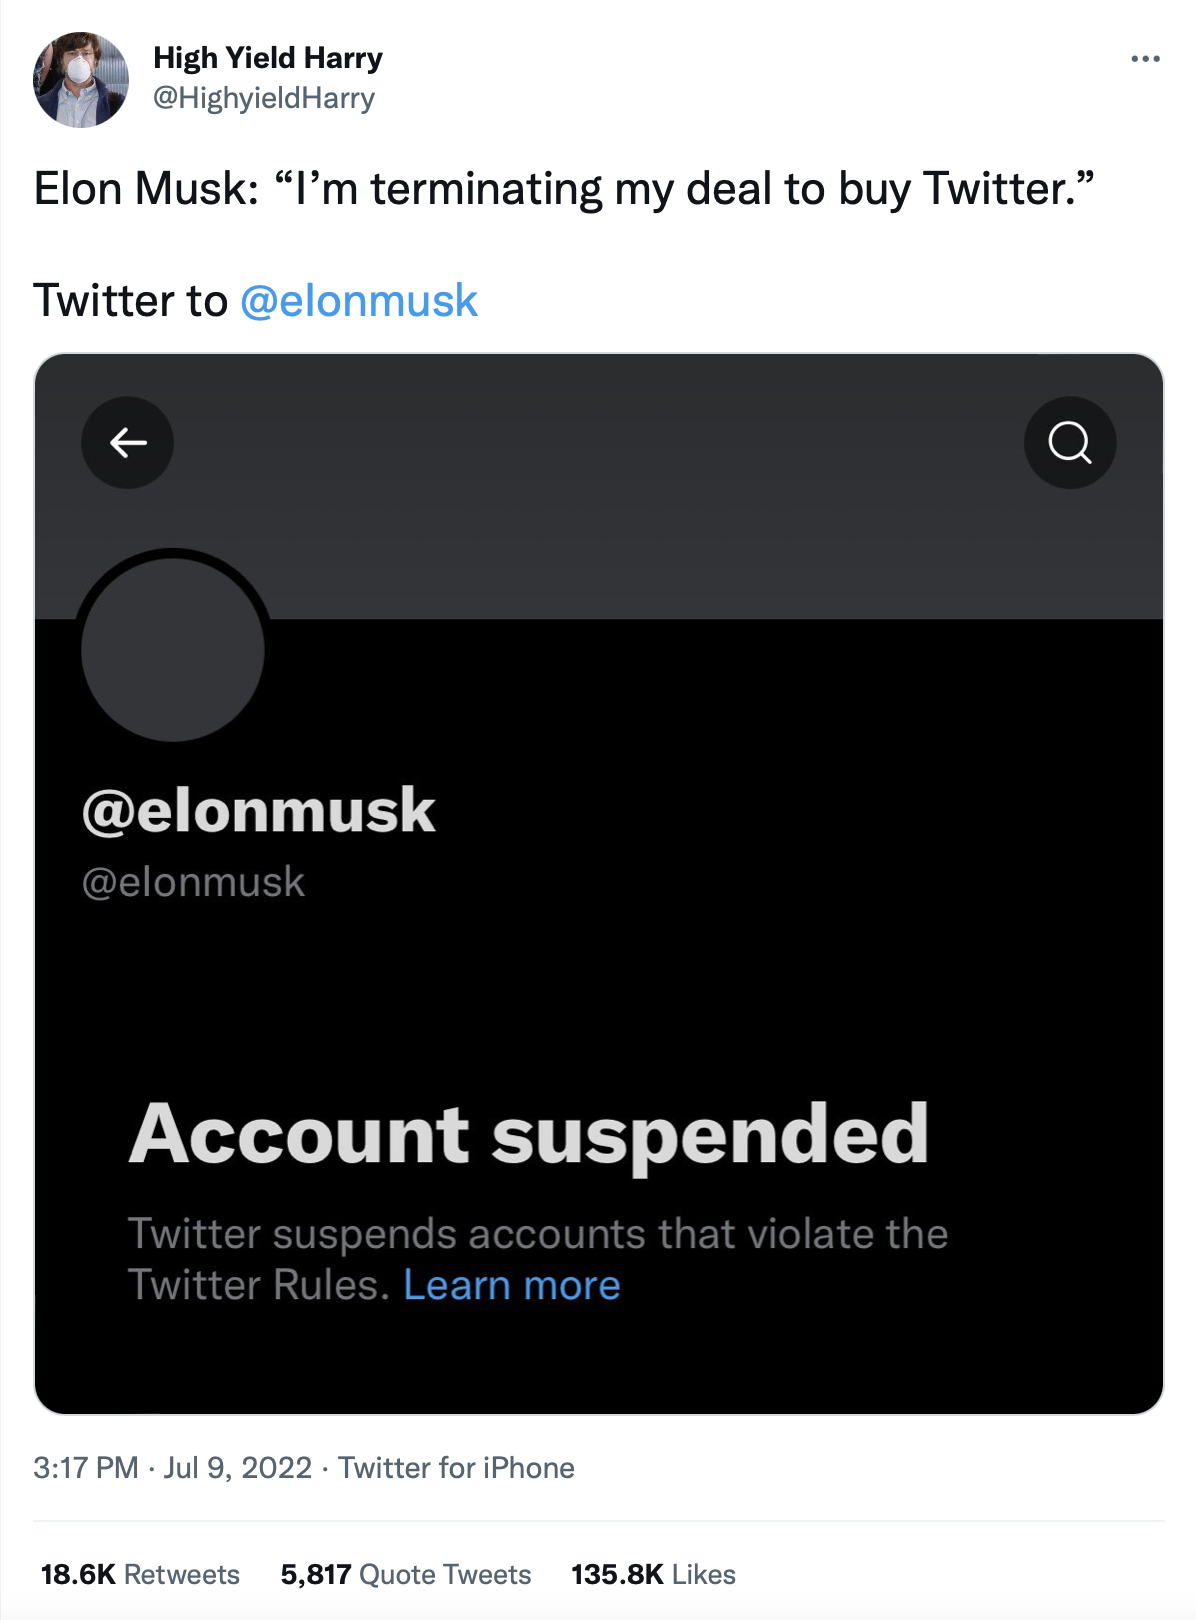 Viral Hoax Claims Elon Musk Was Banned From Twitter After Pulling Out of Takeover Deal